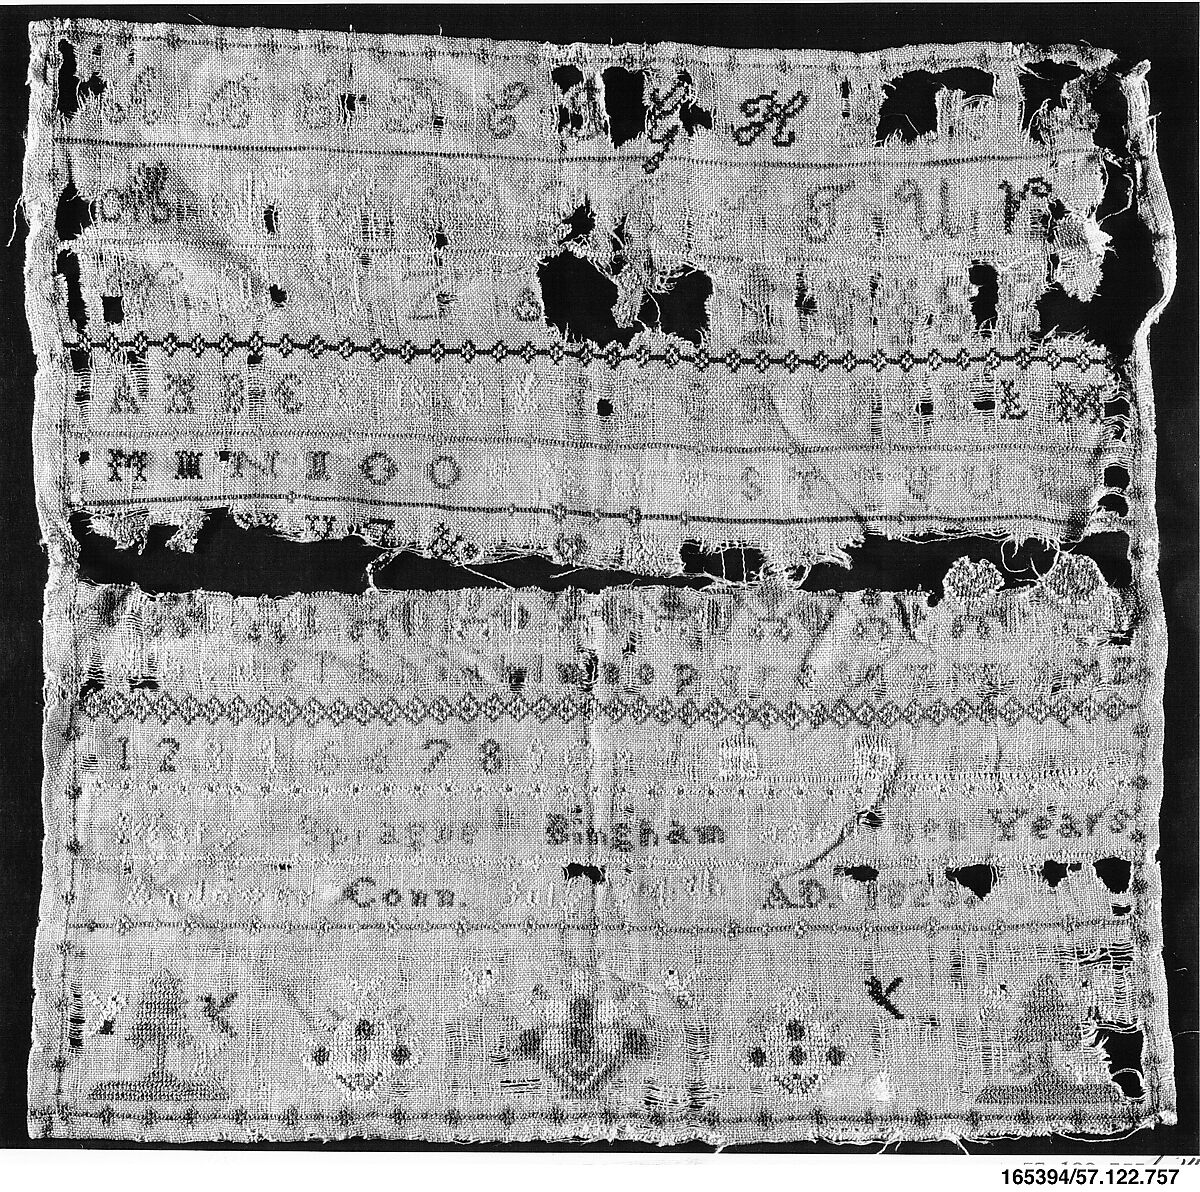 Embroidered sampler, Mary Sprague Bingham (born 1813), Silk embroidered with silk, American 